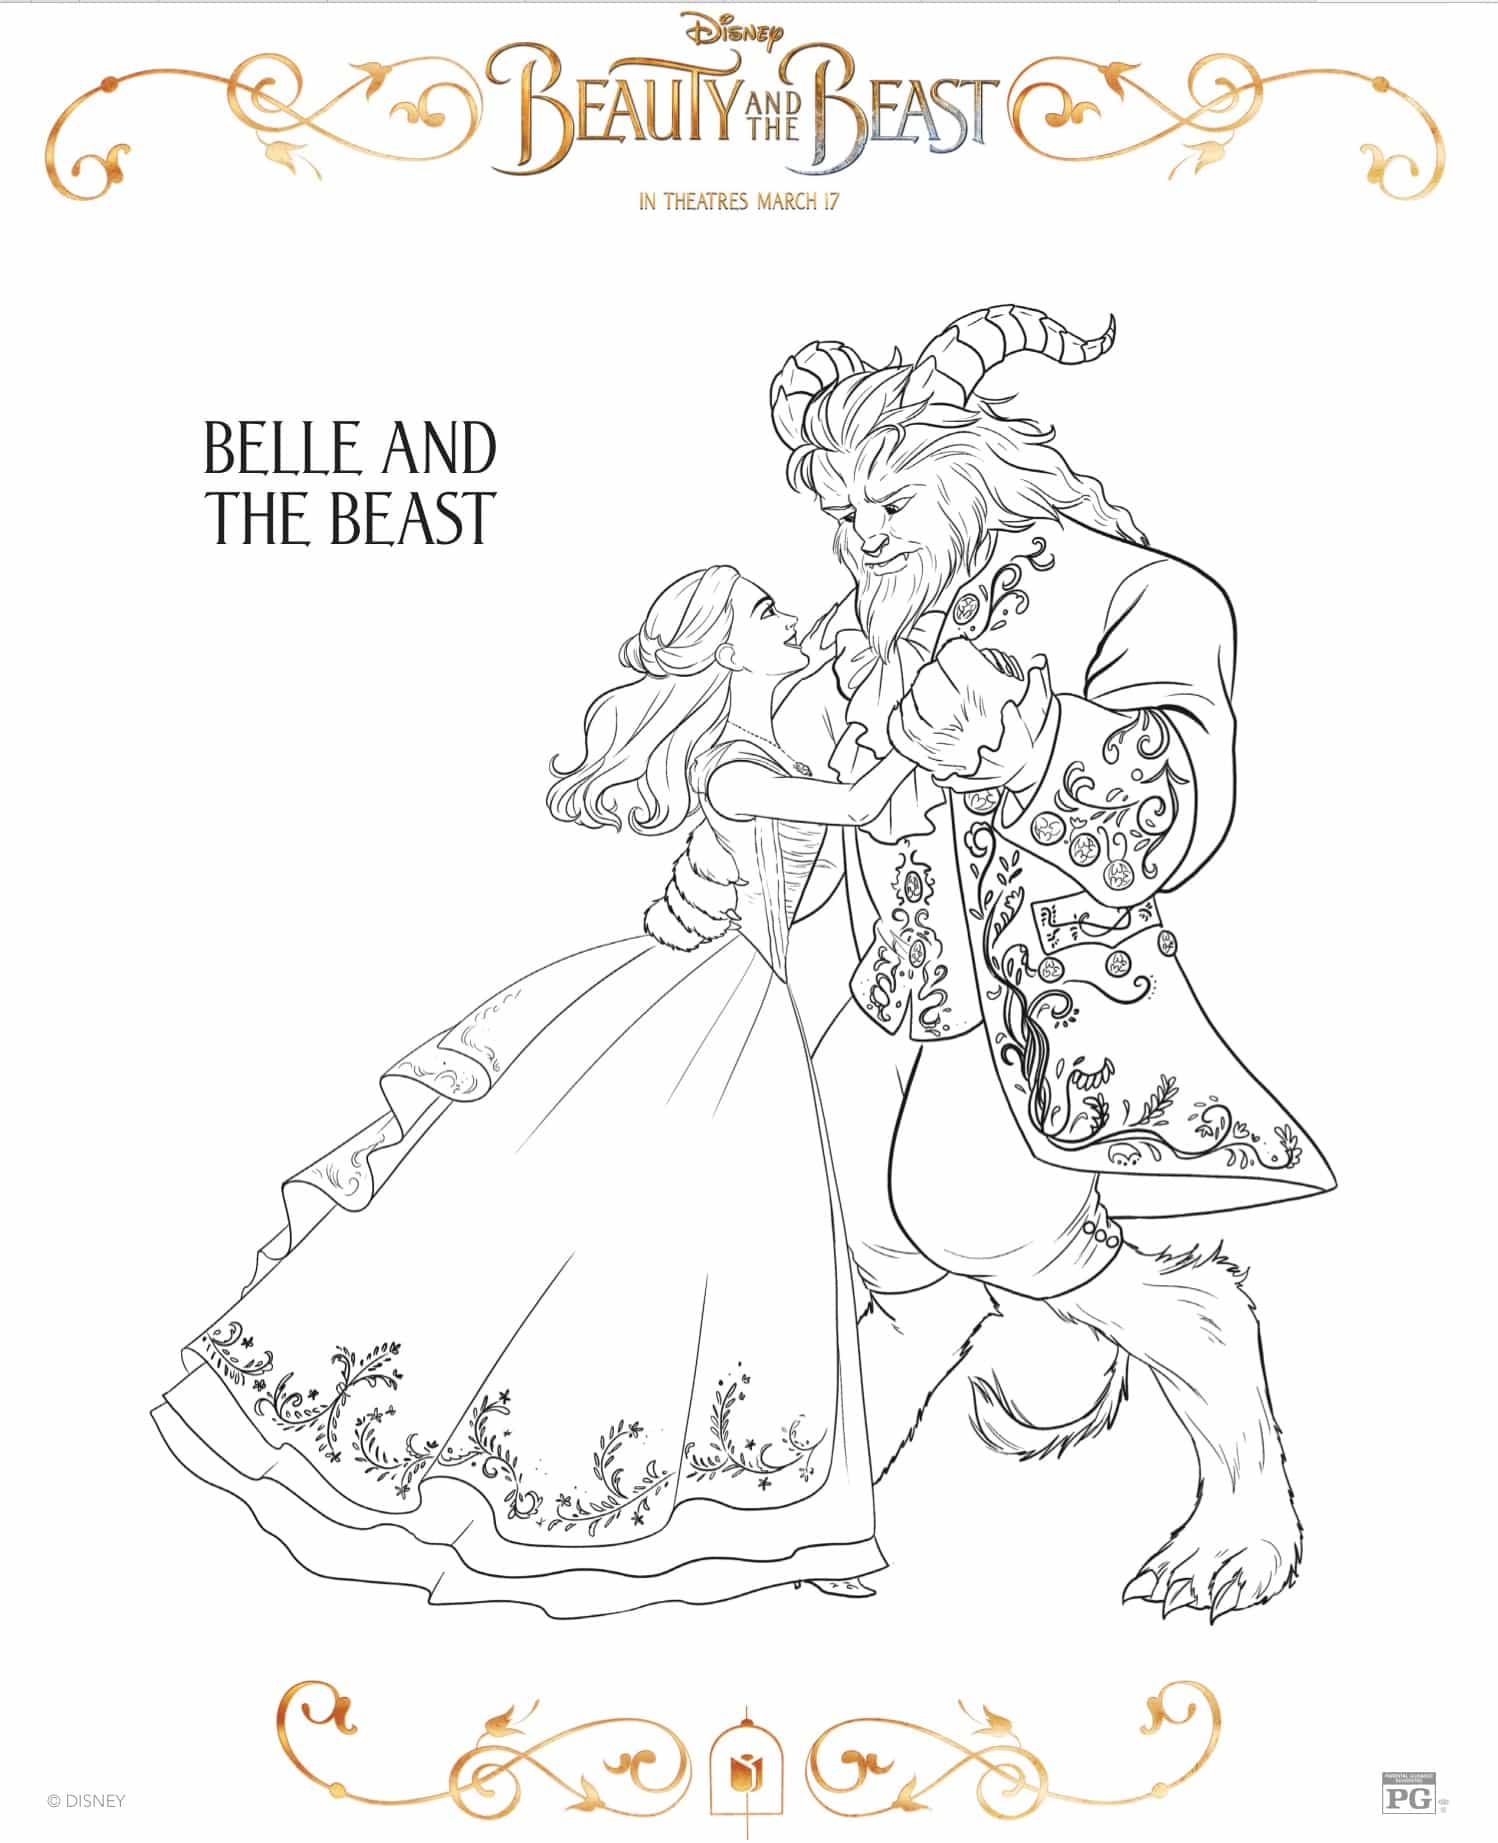 Belle and Beast coloring Sheet from Beauty And The Beast